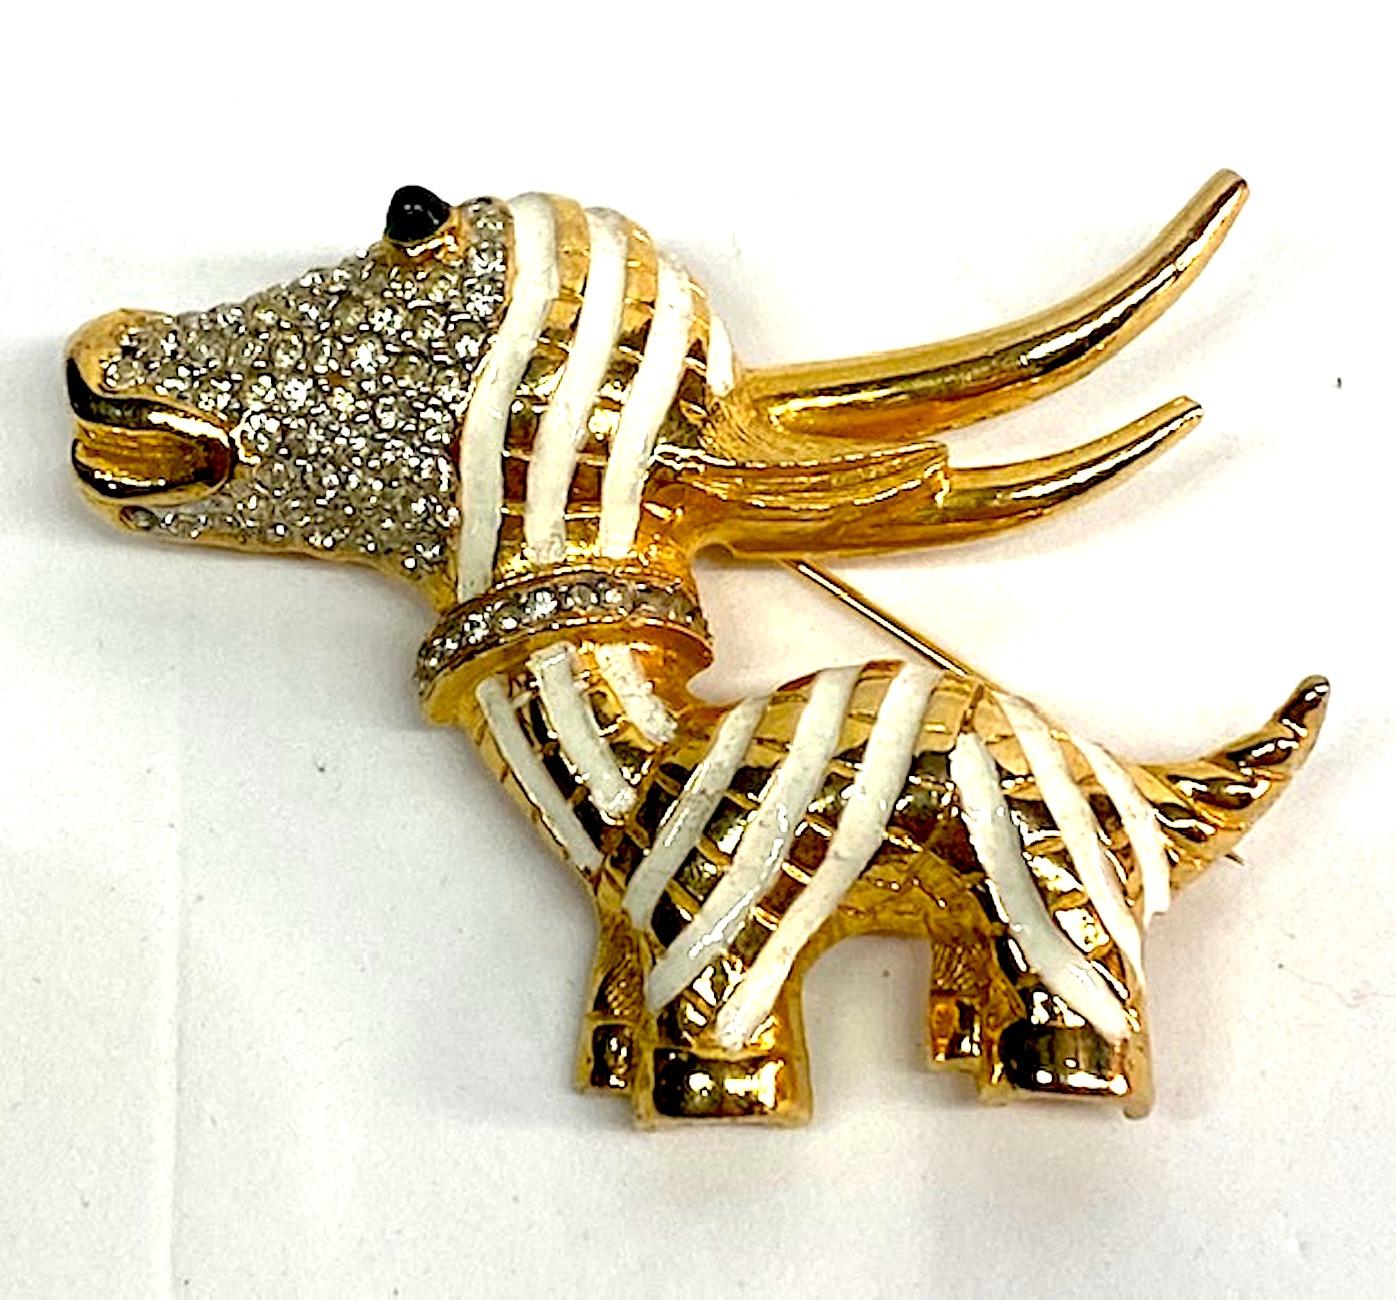 A wonderful interpretation of an African stripe antelope by famous costume jewelry Donald Standard. Donald was Kenneth Jay Lane's assistant until 1972 when he opened his own jewelry company. This piece has a rich gold plate with white enamel